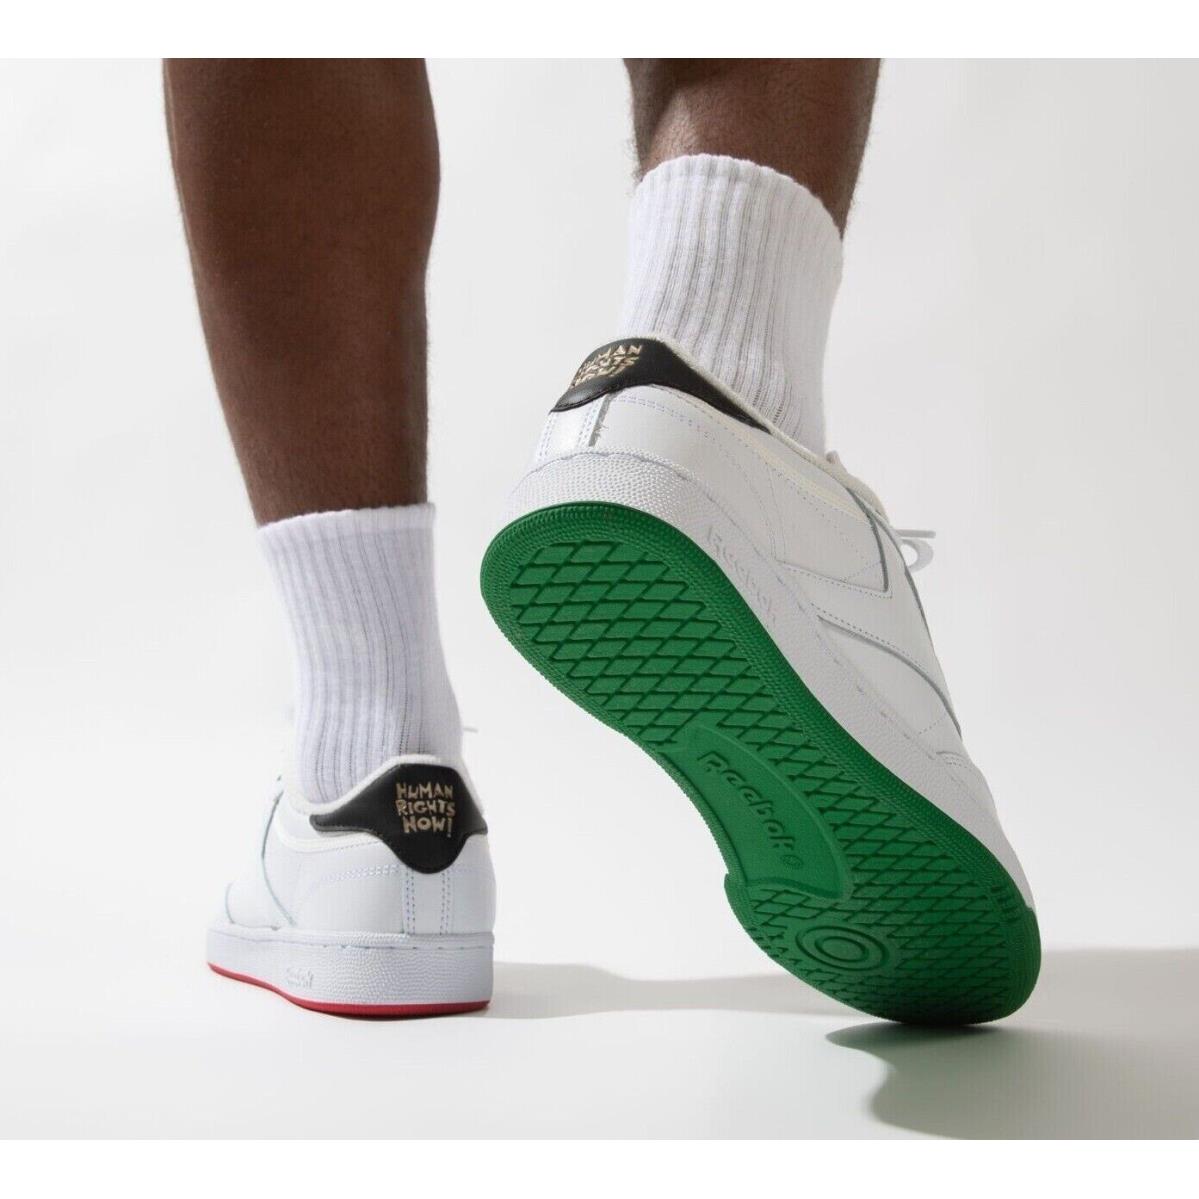 Reebok shoes  - Footwear White / Chalk White / Vector Red / Green 0